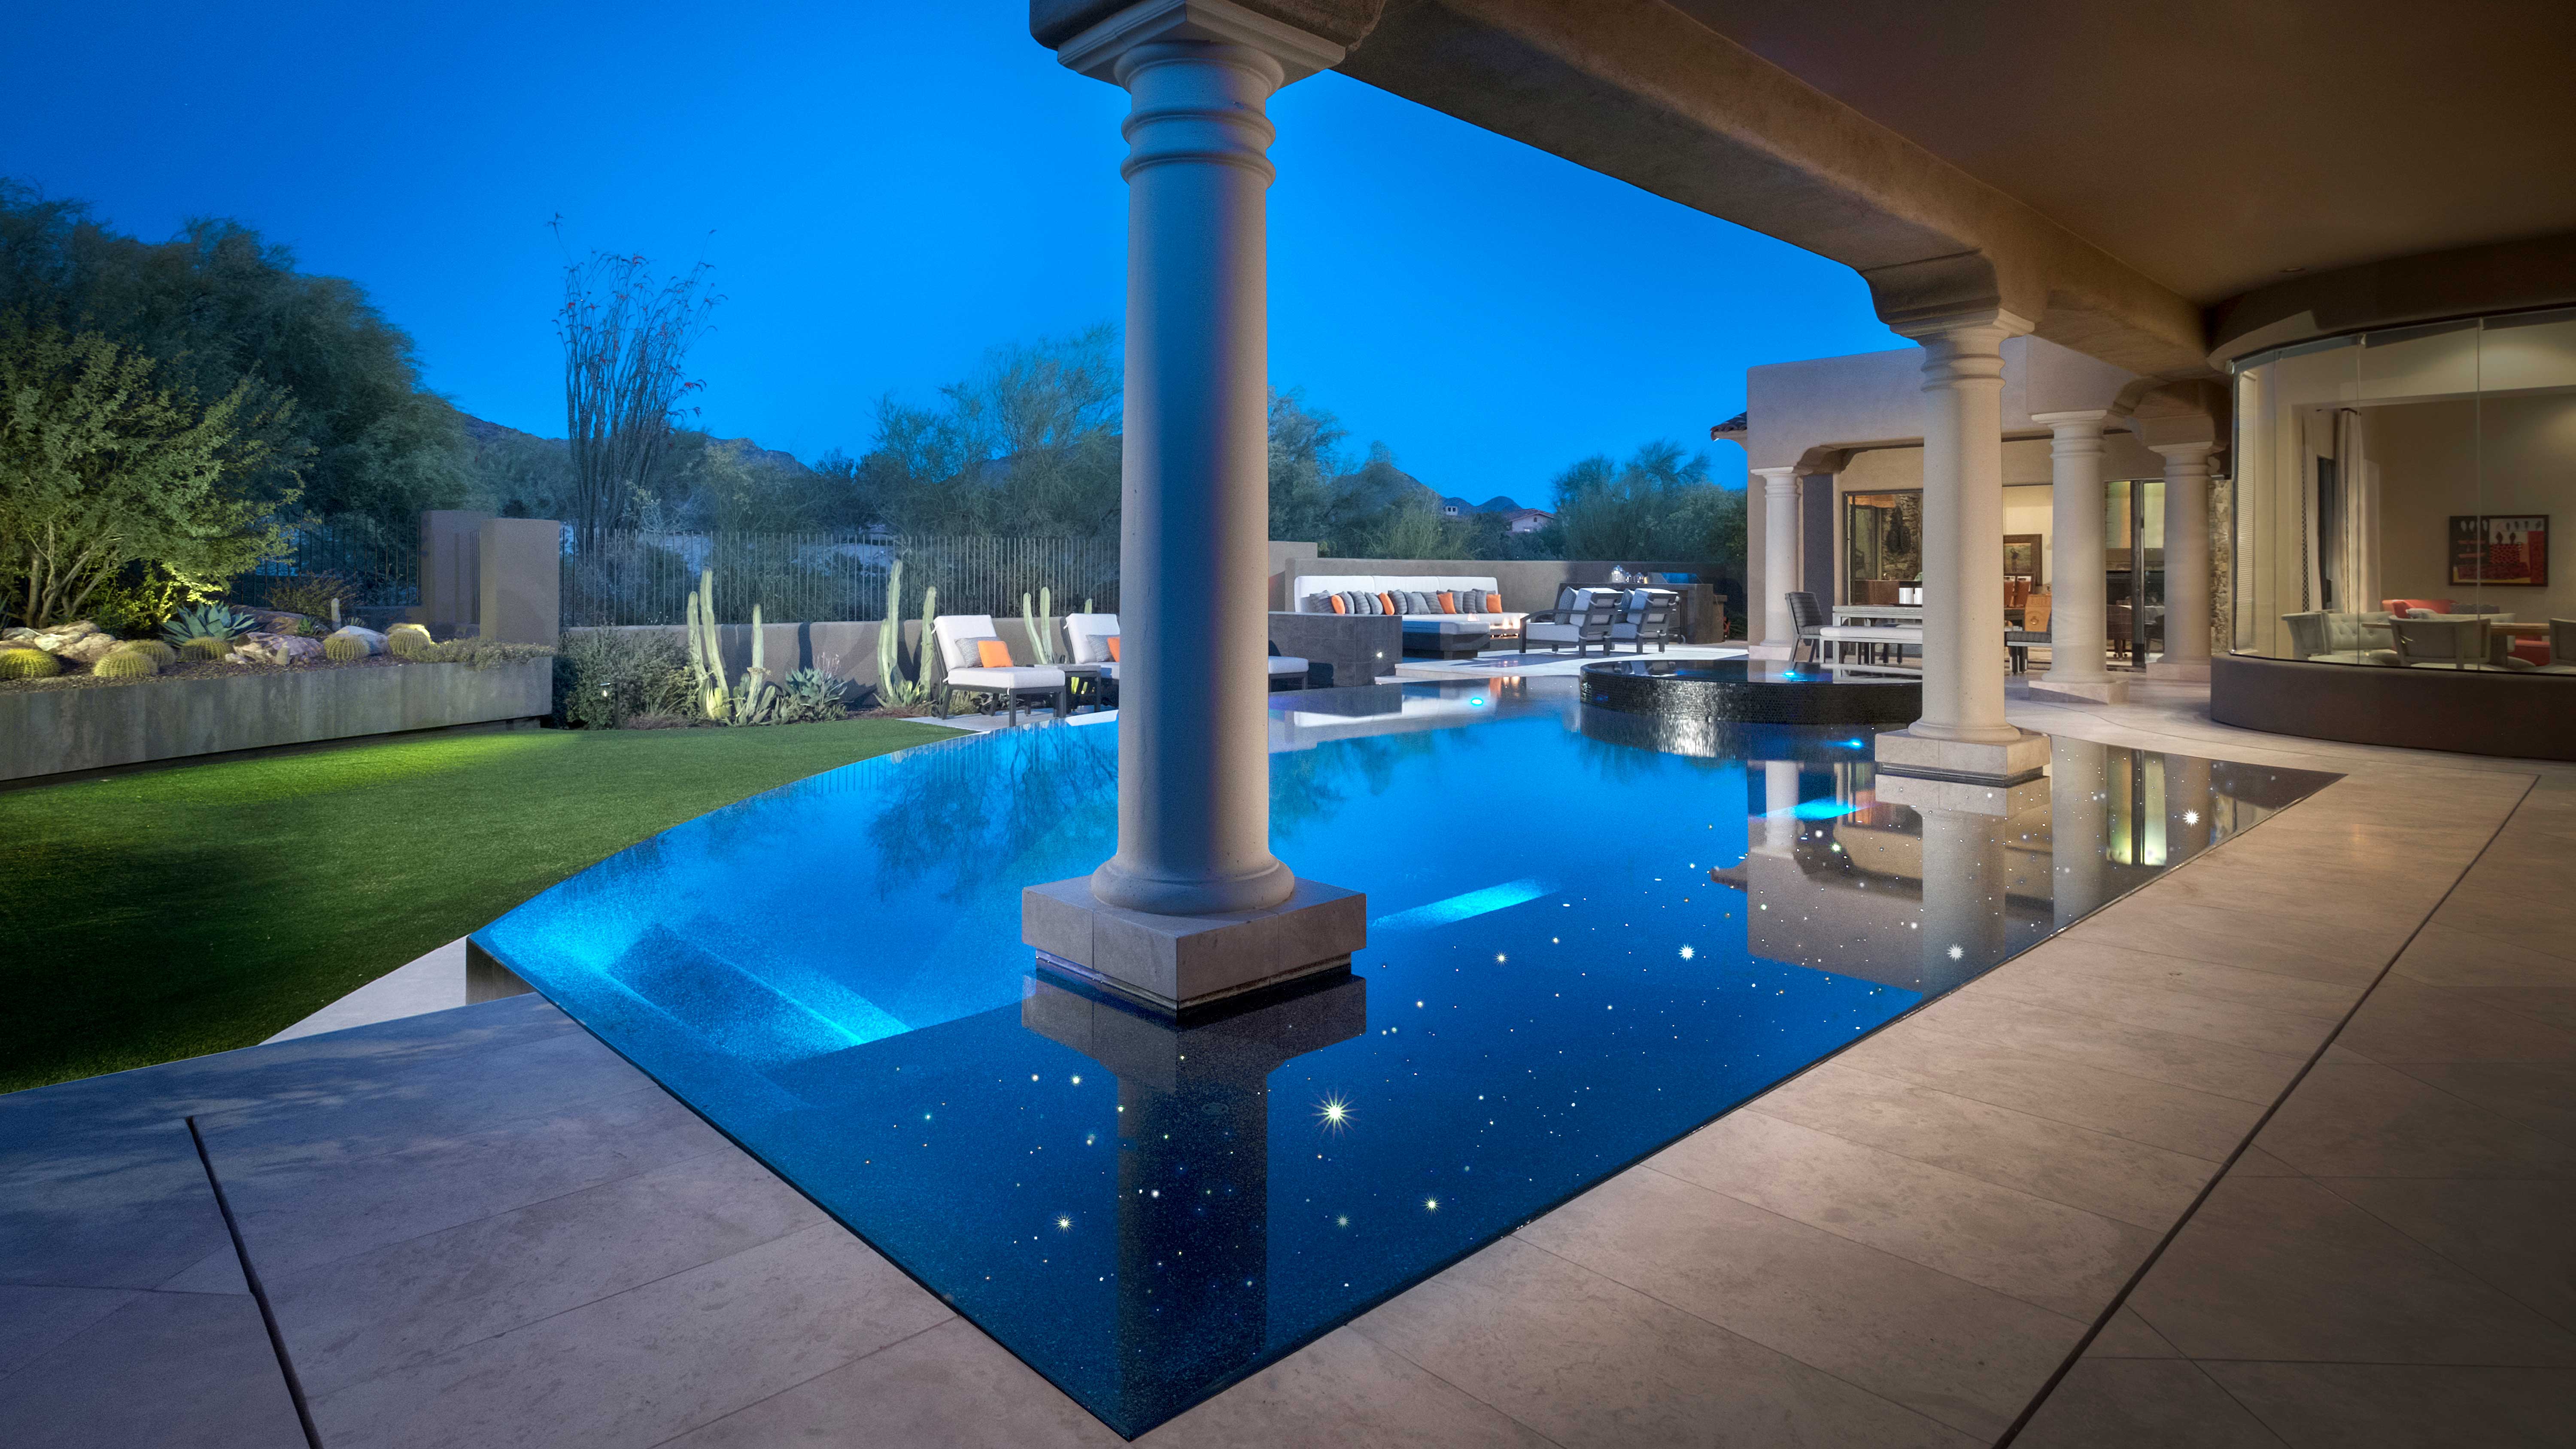 Can I add lights to an existing pool